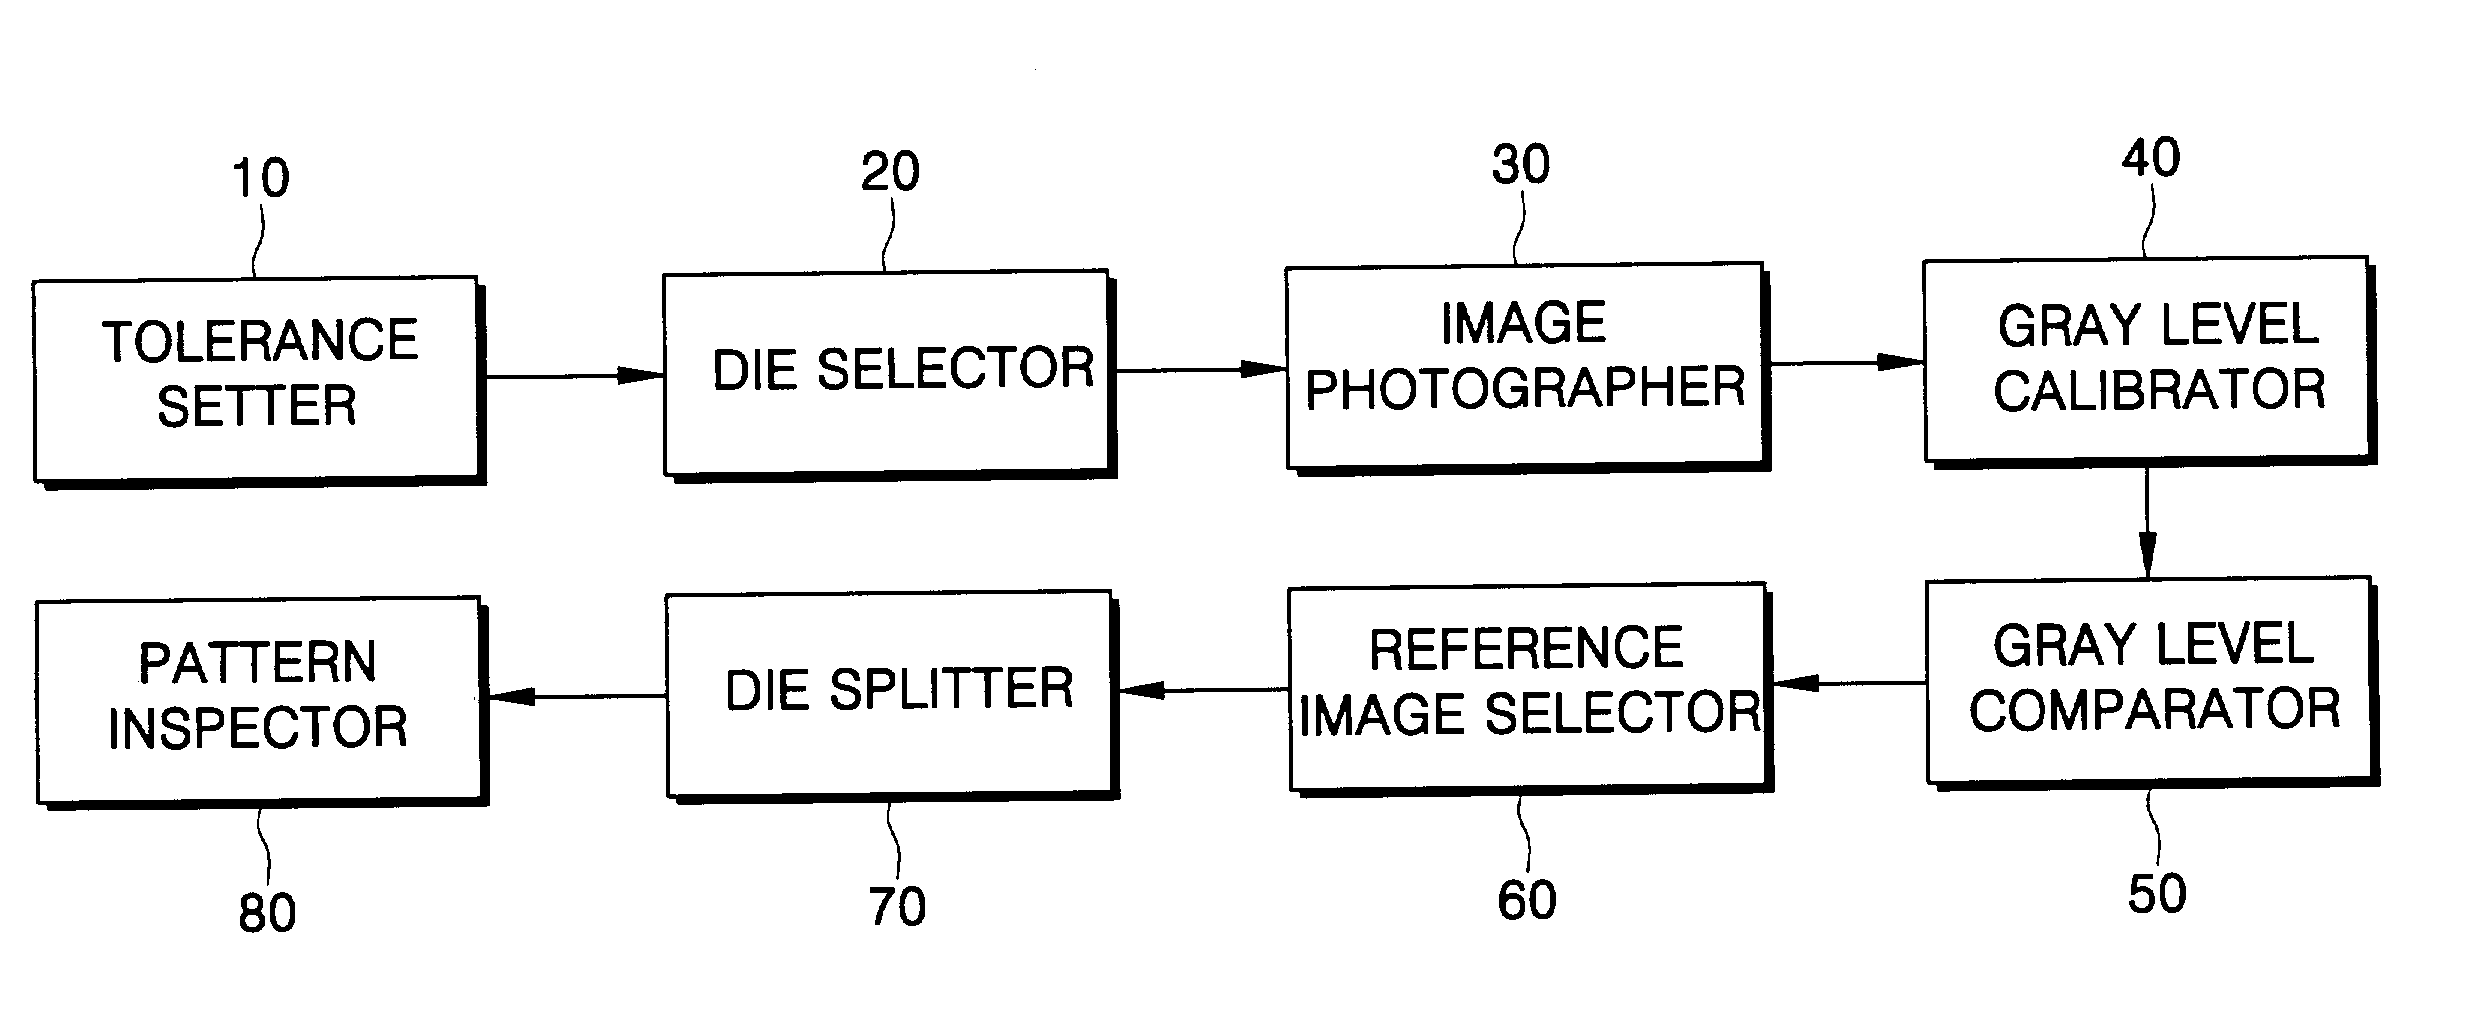 Method for selecting reference images, method and apparatus for inspecting patterns on wafers, and method for dividing a wafer into application regions